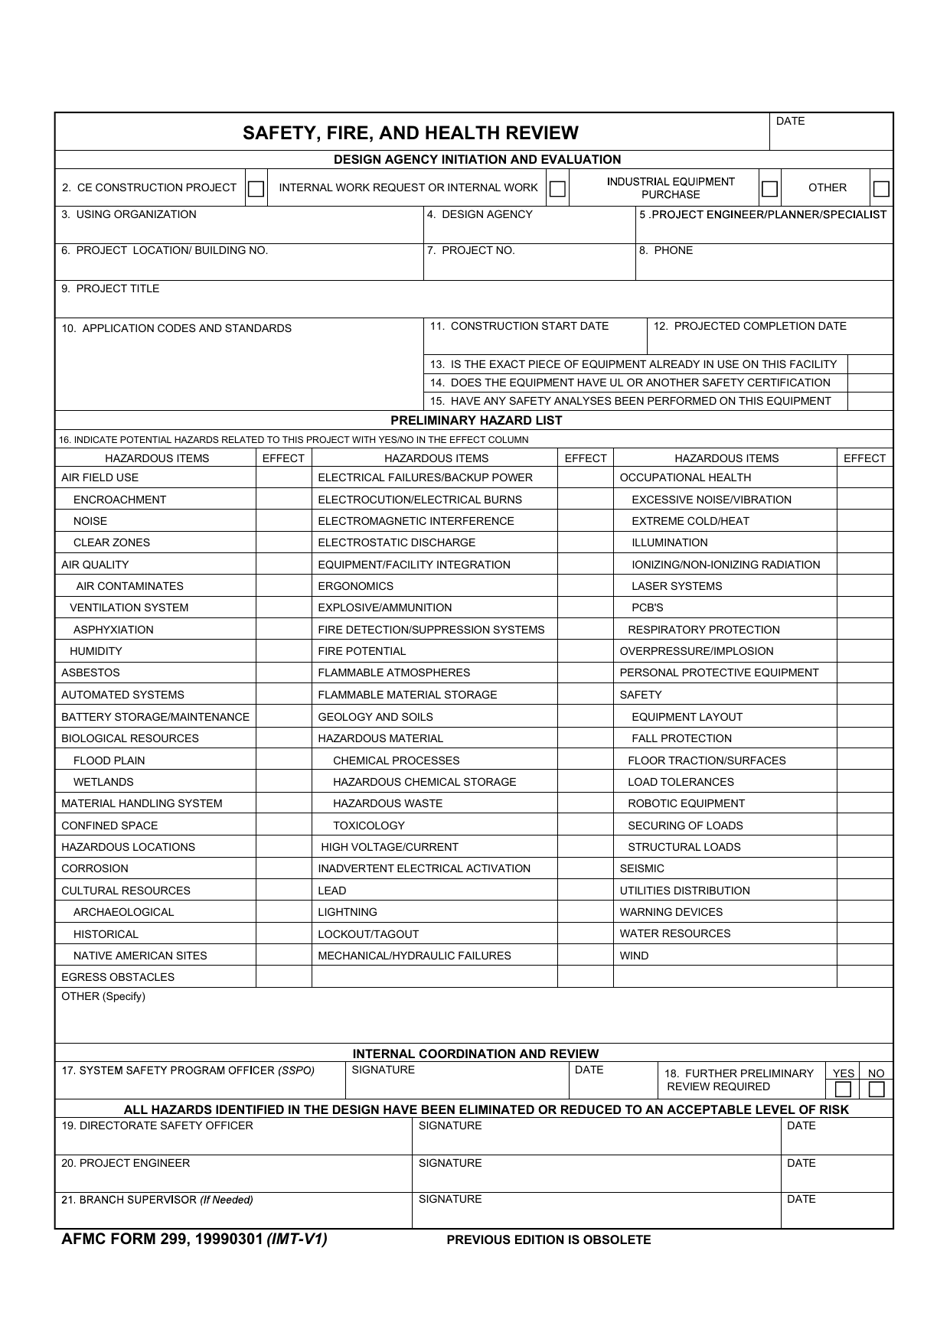 AFMC Form 299 Safety, Fire, and Health Review, Page 1